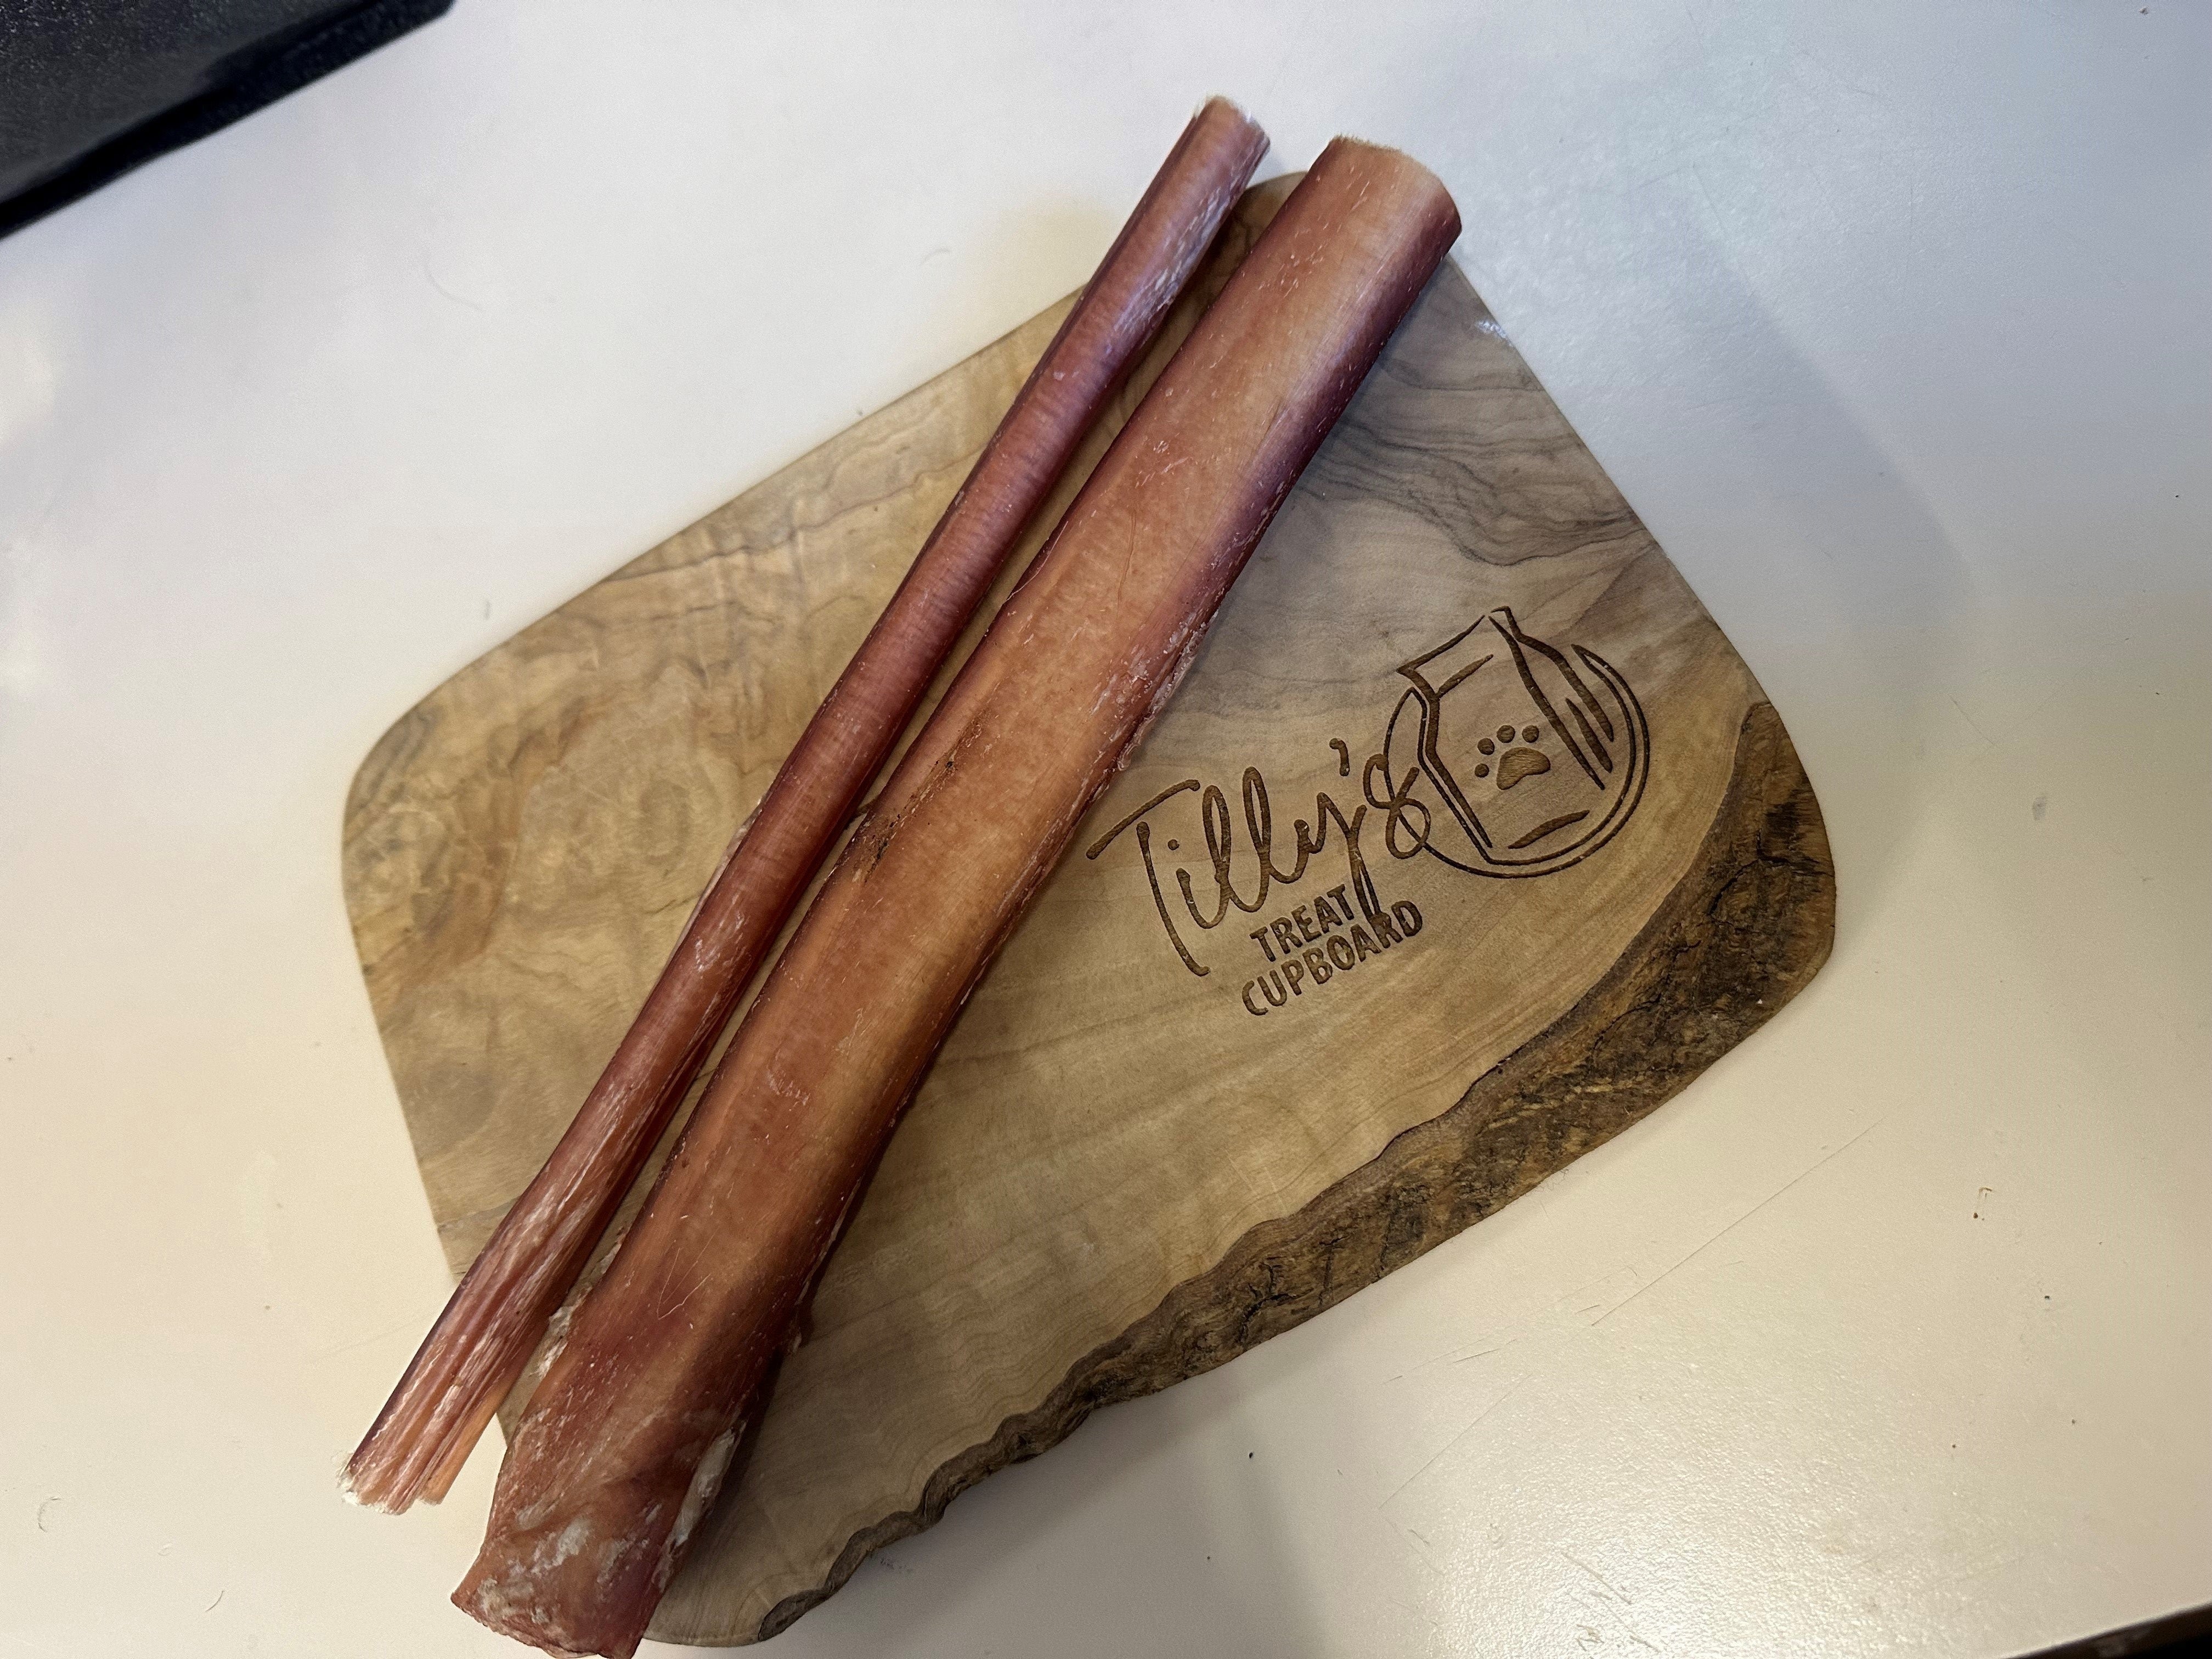 Beef/Bully Pizzle Stick (24cm)